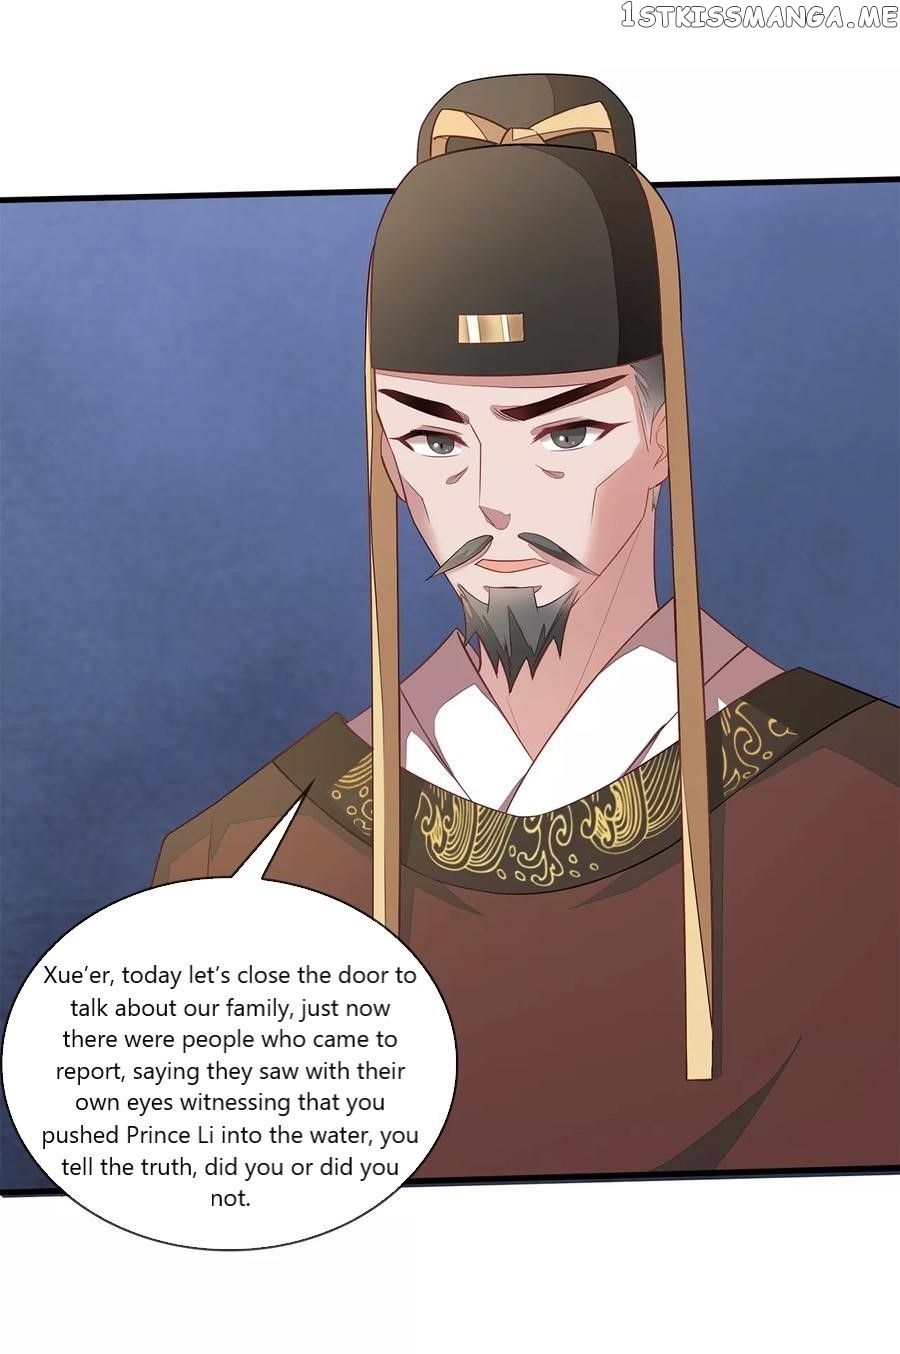 Evil King and Concubine: Healing Hands Cover the Sky chapter 5 - Page 15